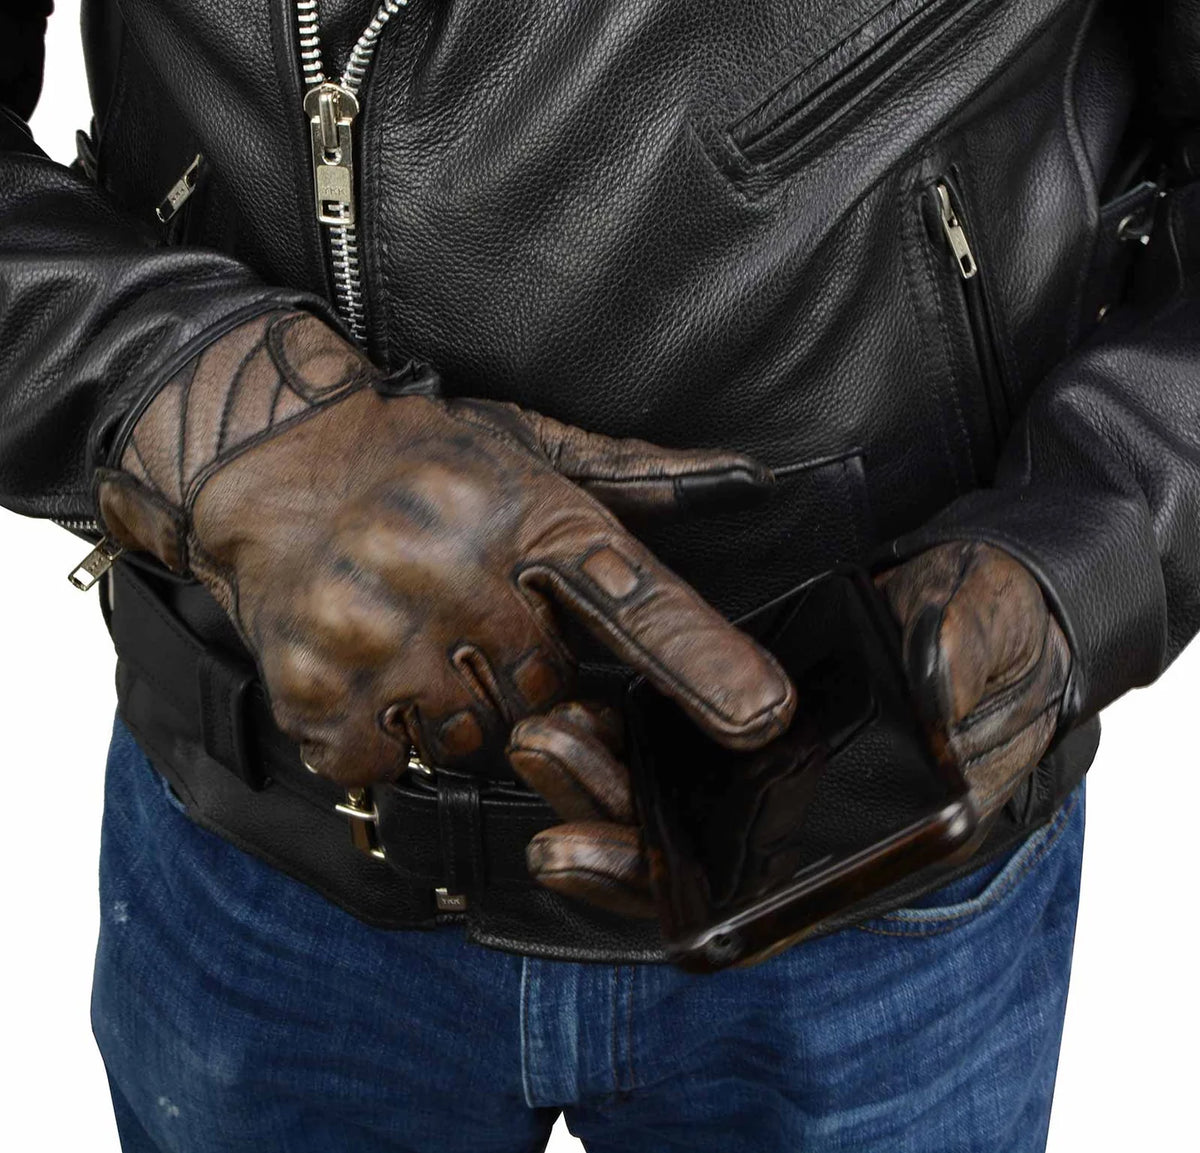 Men's Brown Leather i-Touch Screen Compatible Gel Palm Motorcycle Gloves W/ Protective Knuckle